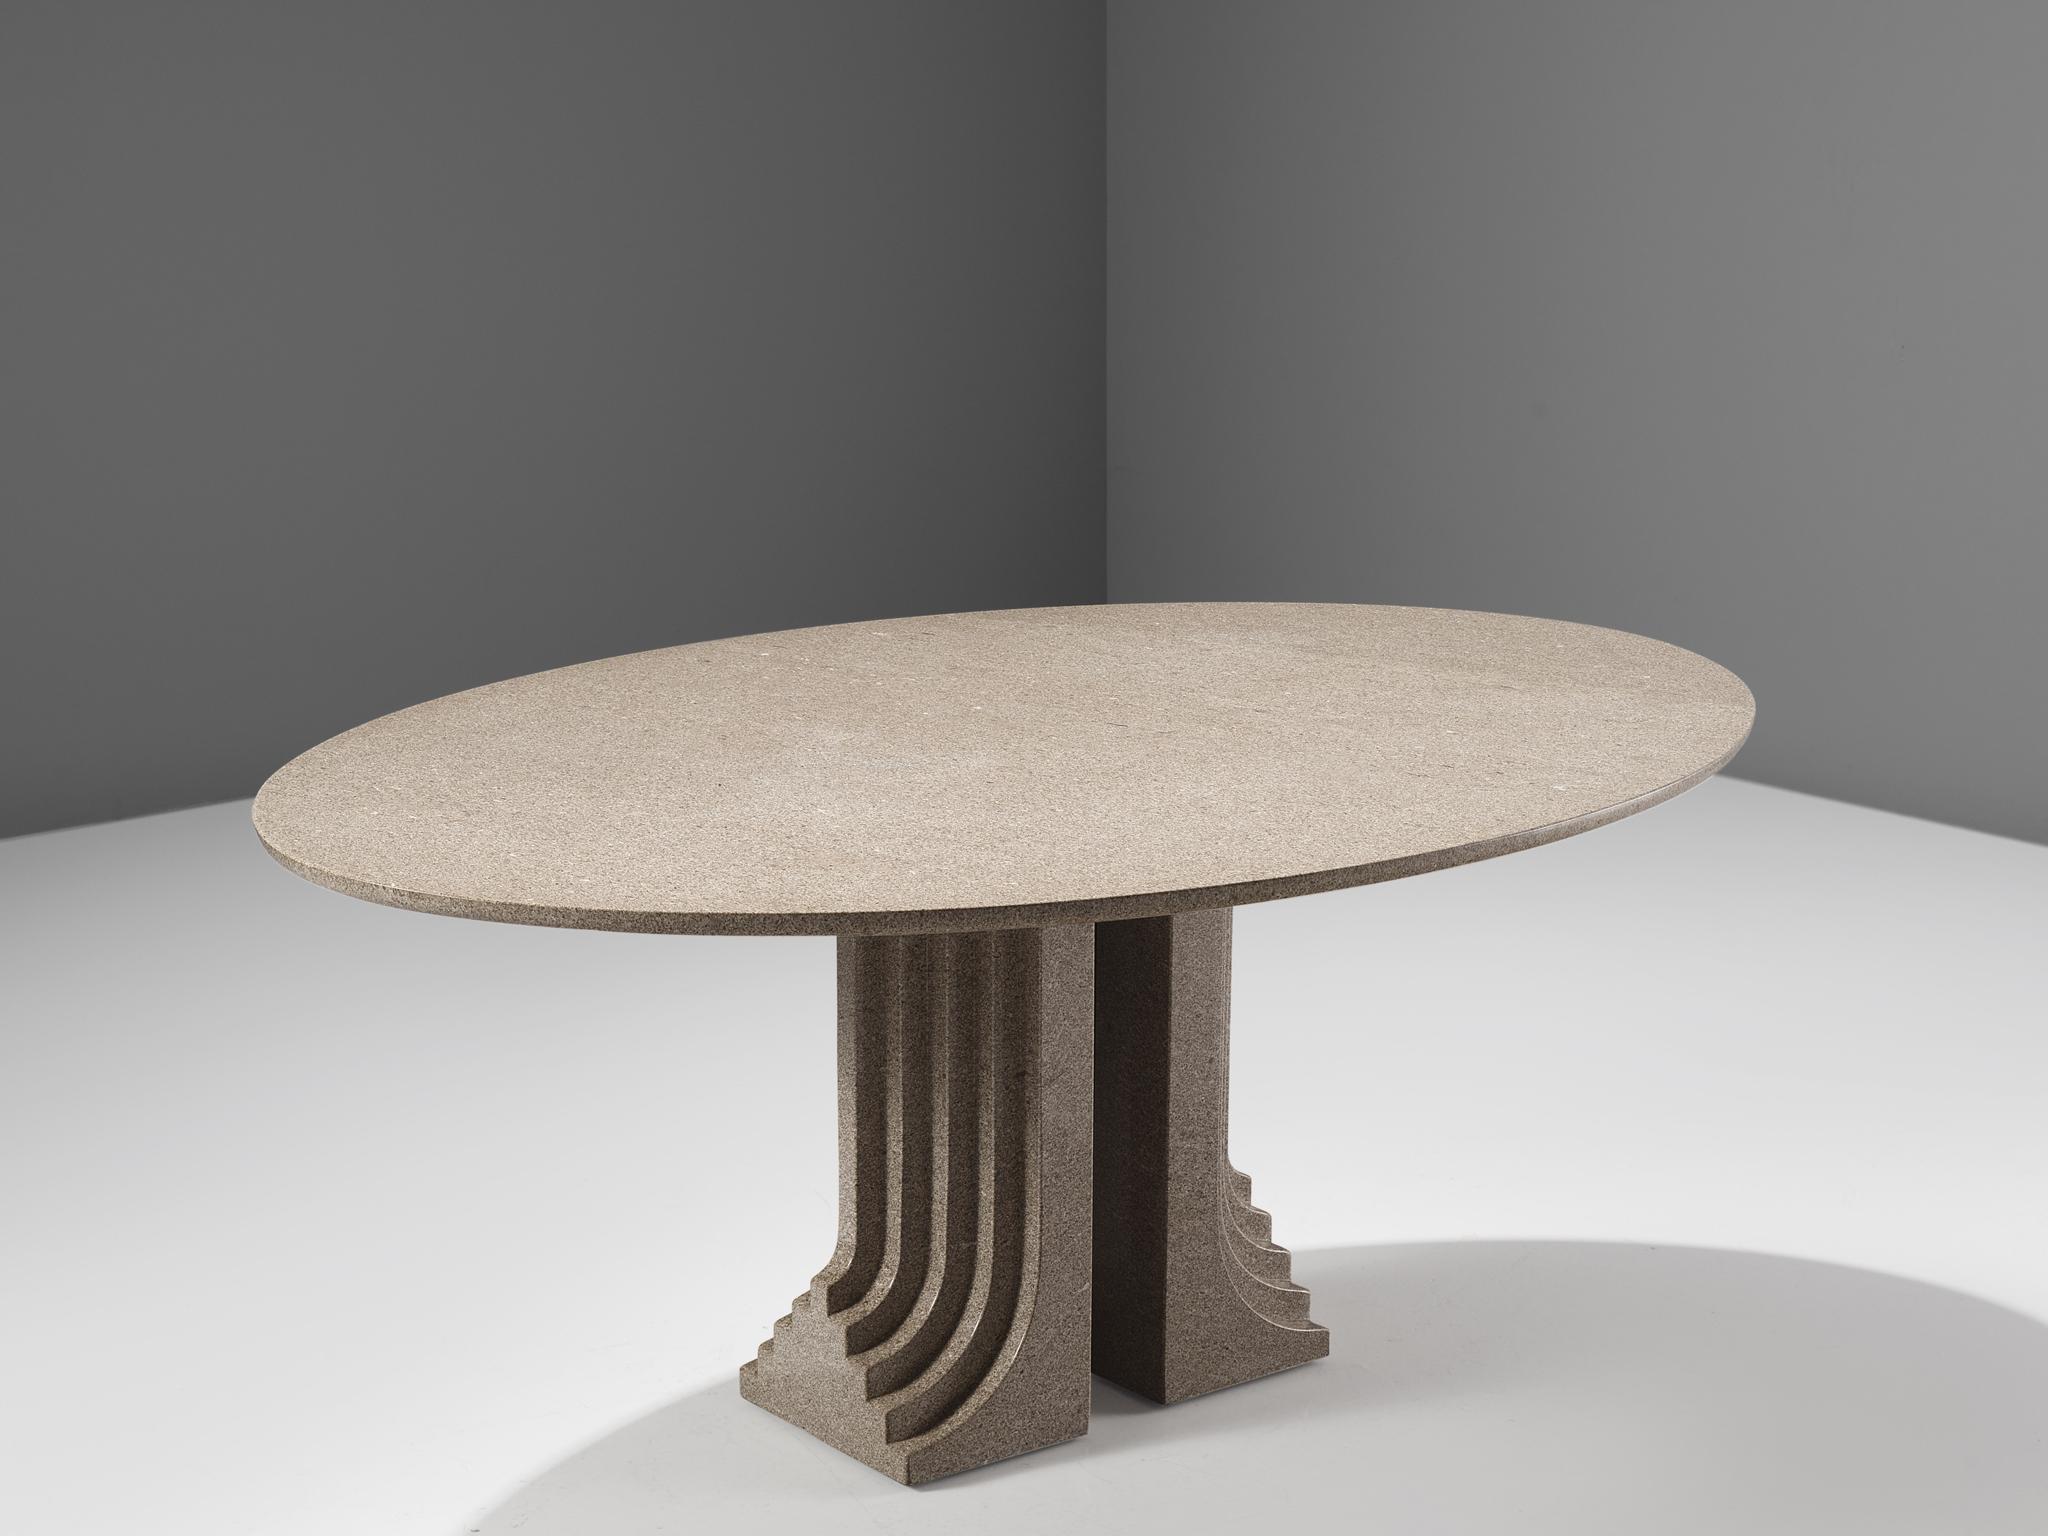 Carlo Scarpa for Simon, granite, Italy, 1970s

This 'Samo' table is part of the 'Ultrarazionale' collection by Simon. The base of the table is formed out of two layered pillars that seem to exist of several pillars in a row, clearly a reference to